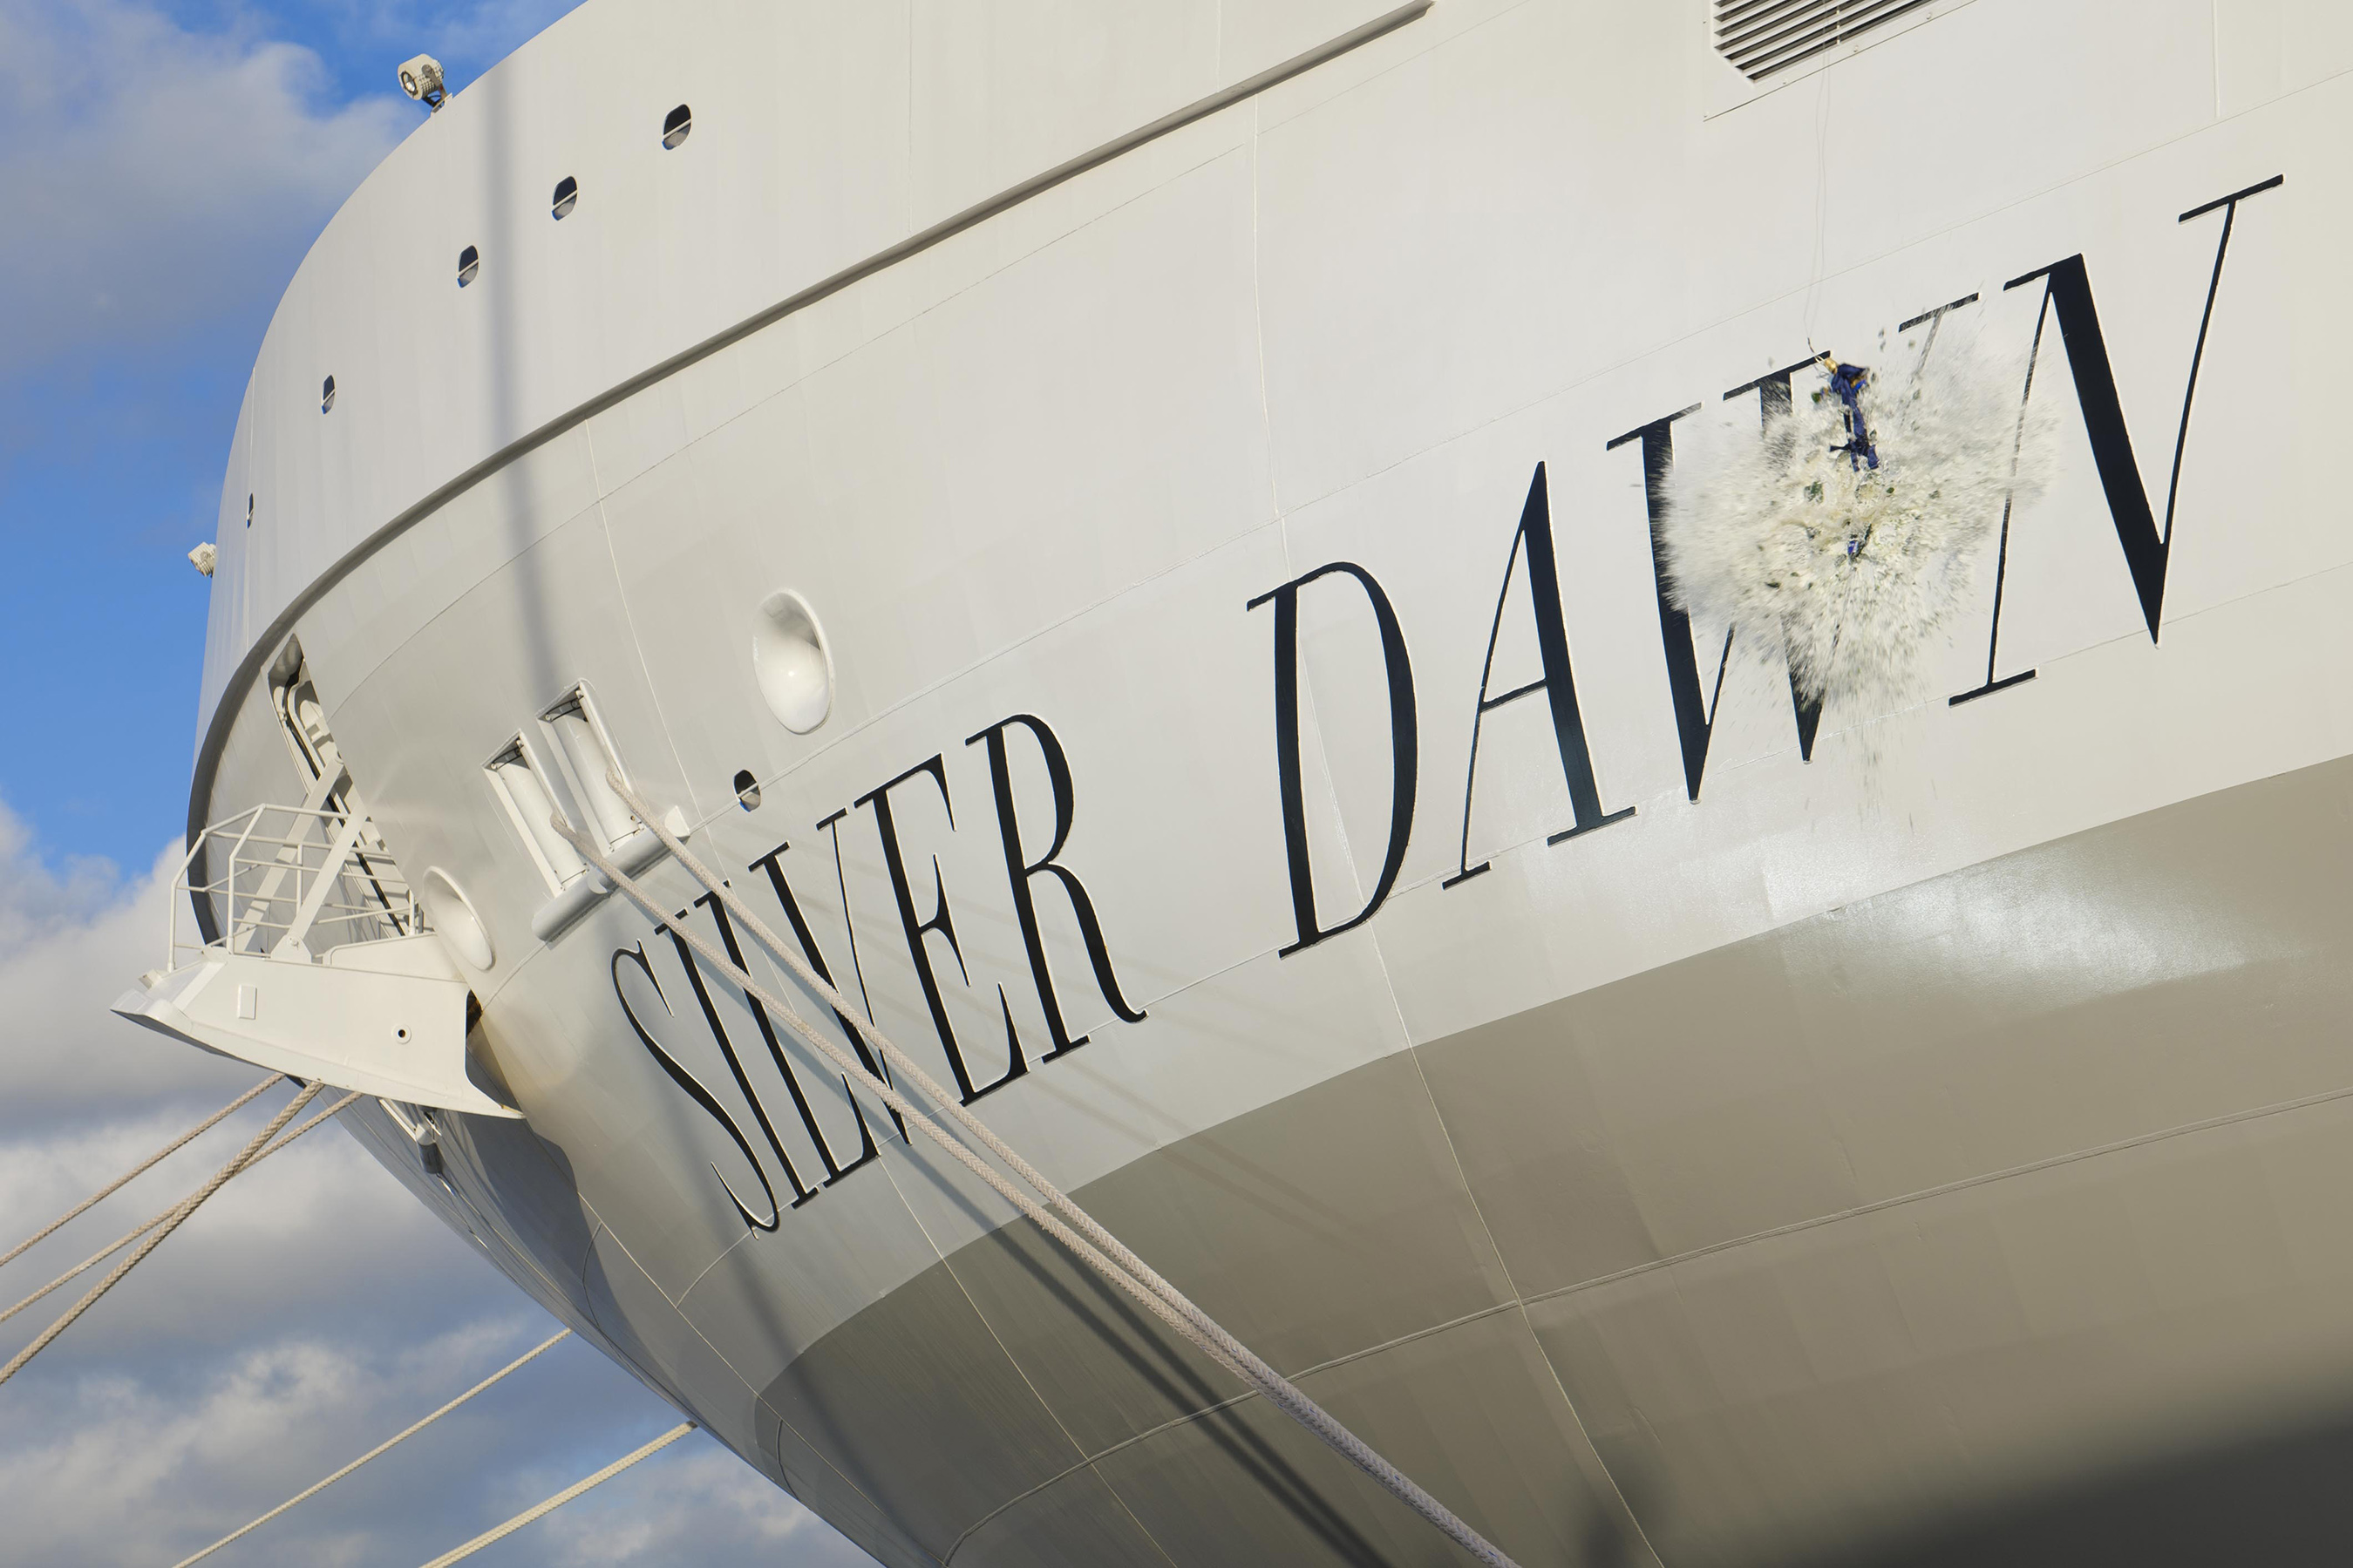 A maritime tradition, a bottle of champagne smashed on Silver Dawn’s hull to mark her official naming.